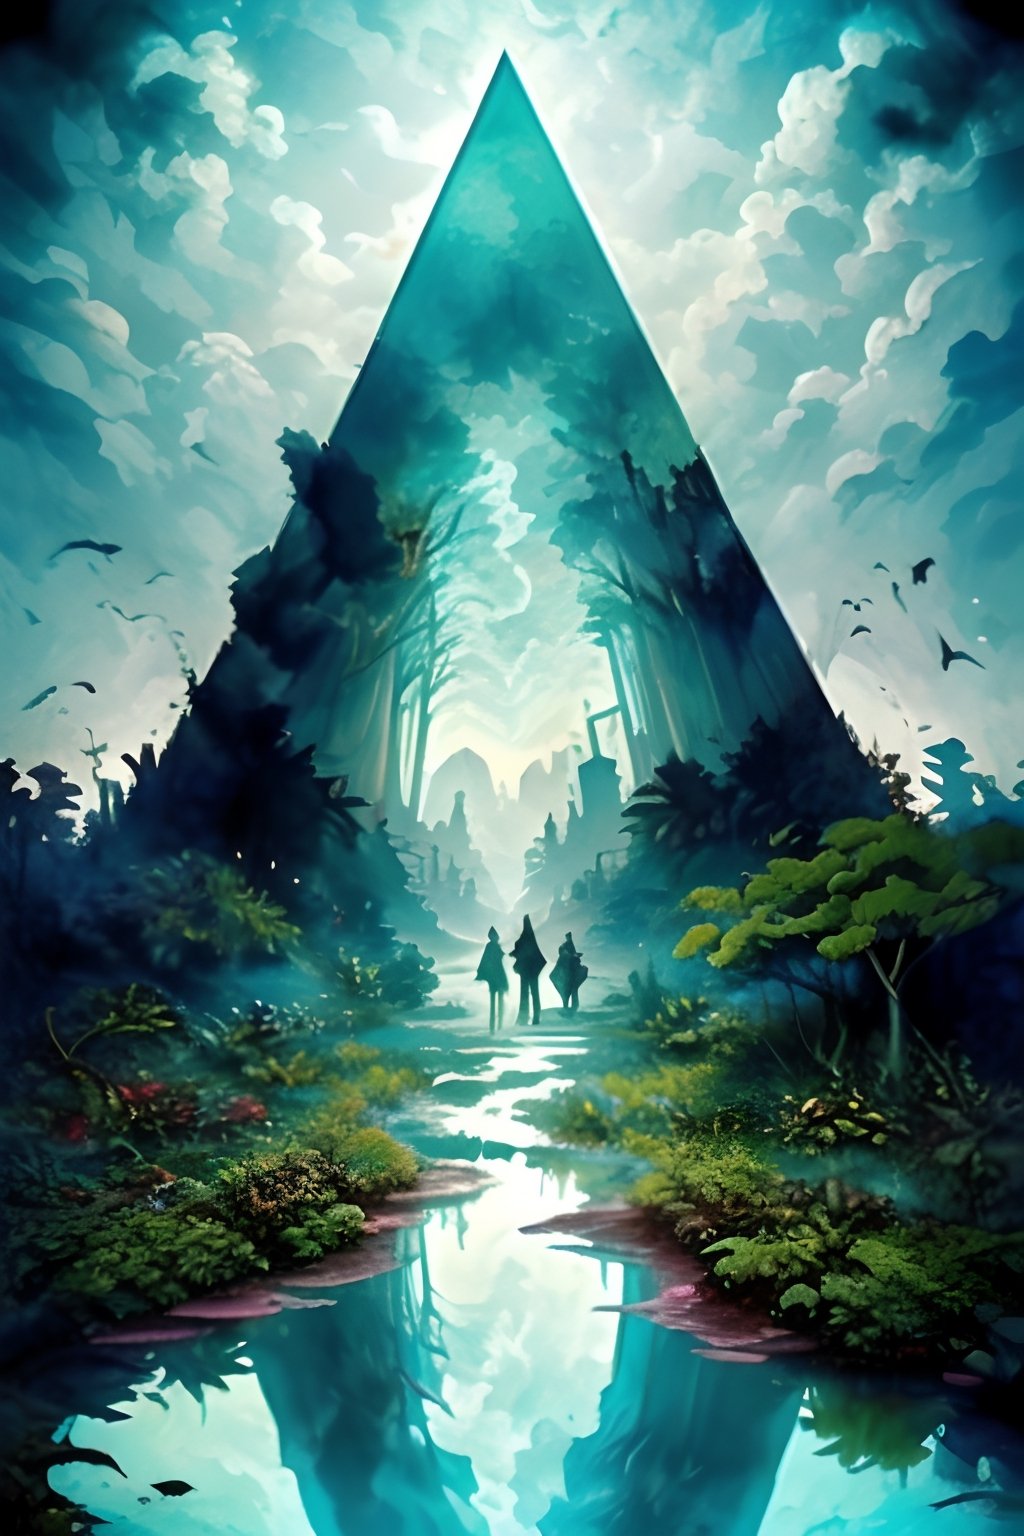 a bizarre dreamlike depiction of exploring the unknown, (1 white boy , 1 Japanese girl), dark hair, holding hands, looking at sky, exploring a dark magical fantasy forest with twisted ancient trees, ancient magical ruins, hidden creatures, walking on reflection, path toward eye in pyramid, dreamscape, bizarre hallucinations, dreampunk, ghosts in mist, incredible artwork, painting, best quality, beautiful, perfect detail, ornate, rule of thirds, creepy, strange creatures, Fae ,magic Circle, magic patterns,Leonardo Style,Movie Still,dfdd,lofi, illustration,vector art,EpicSky